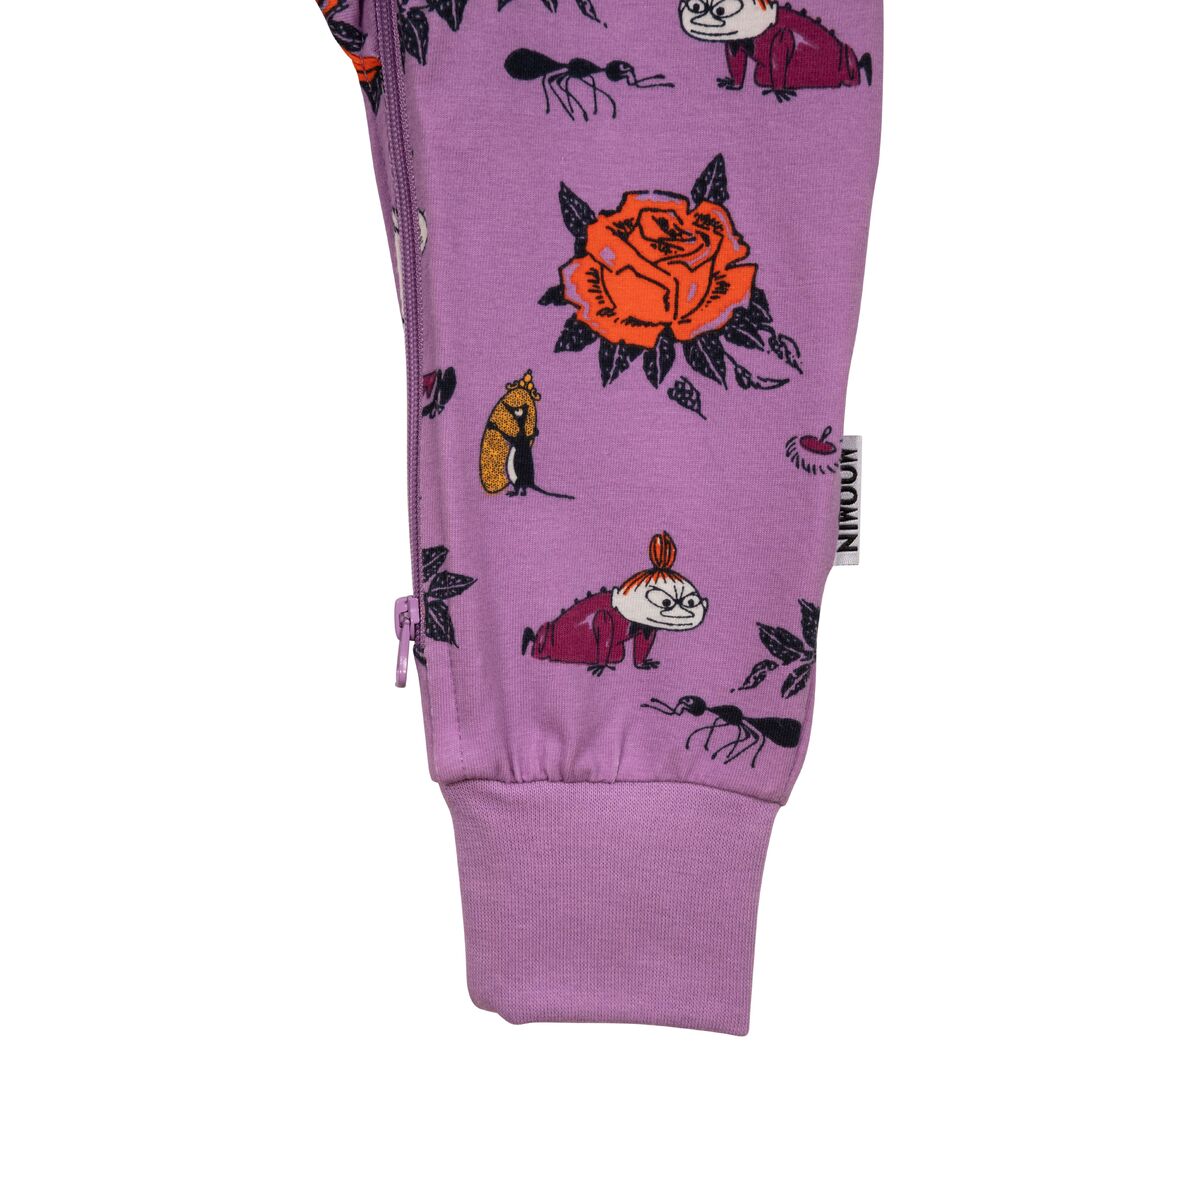 Moomin by martinex - Heilgalli roses lilac